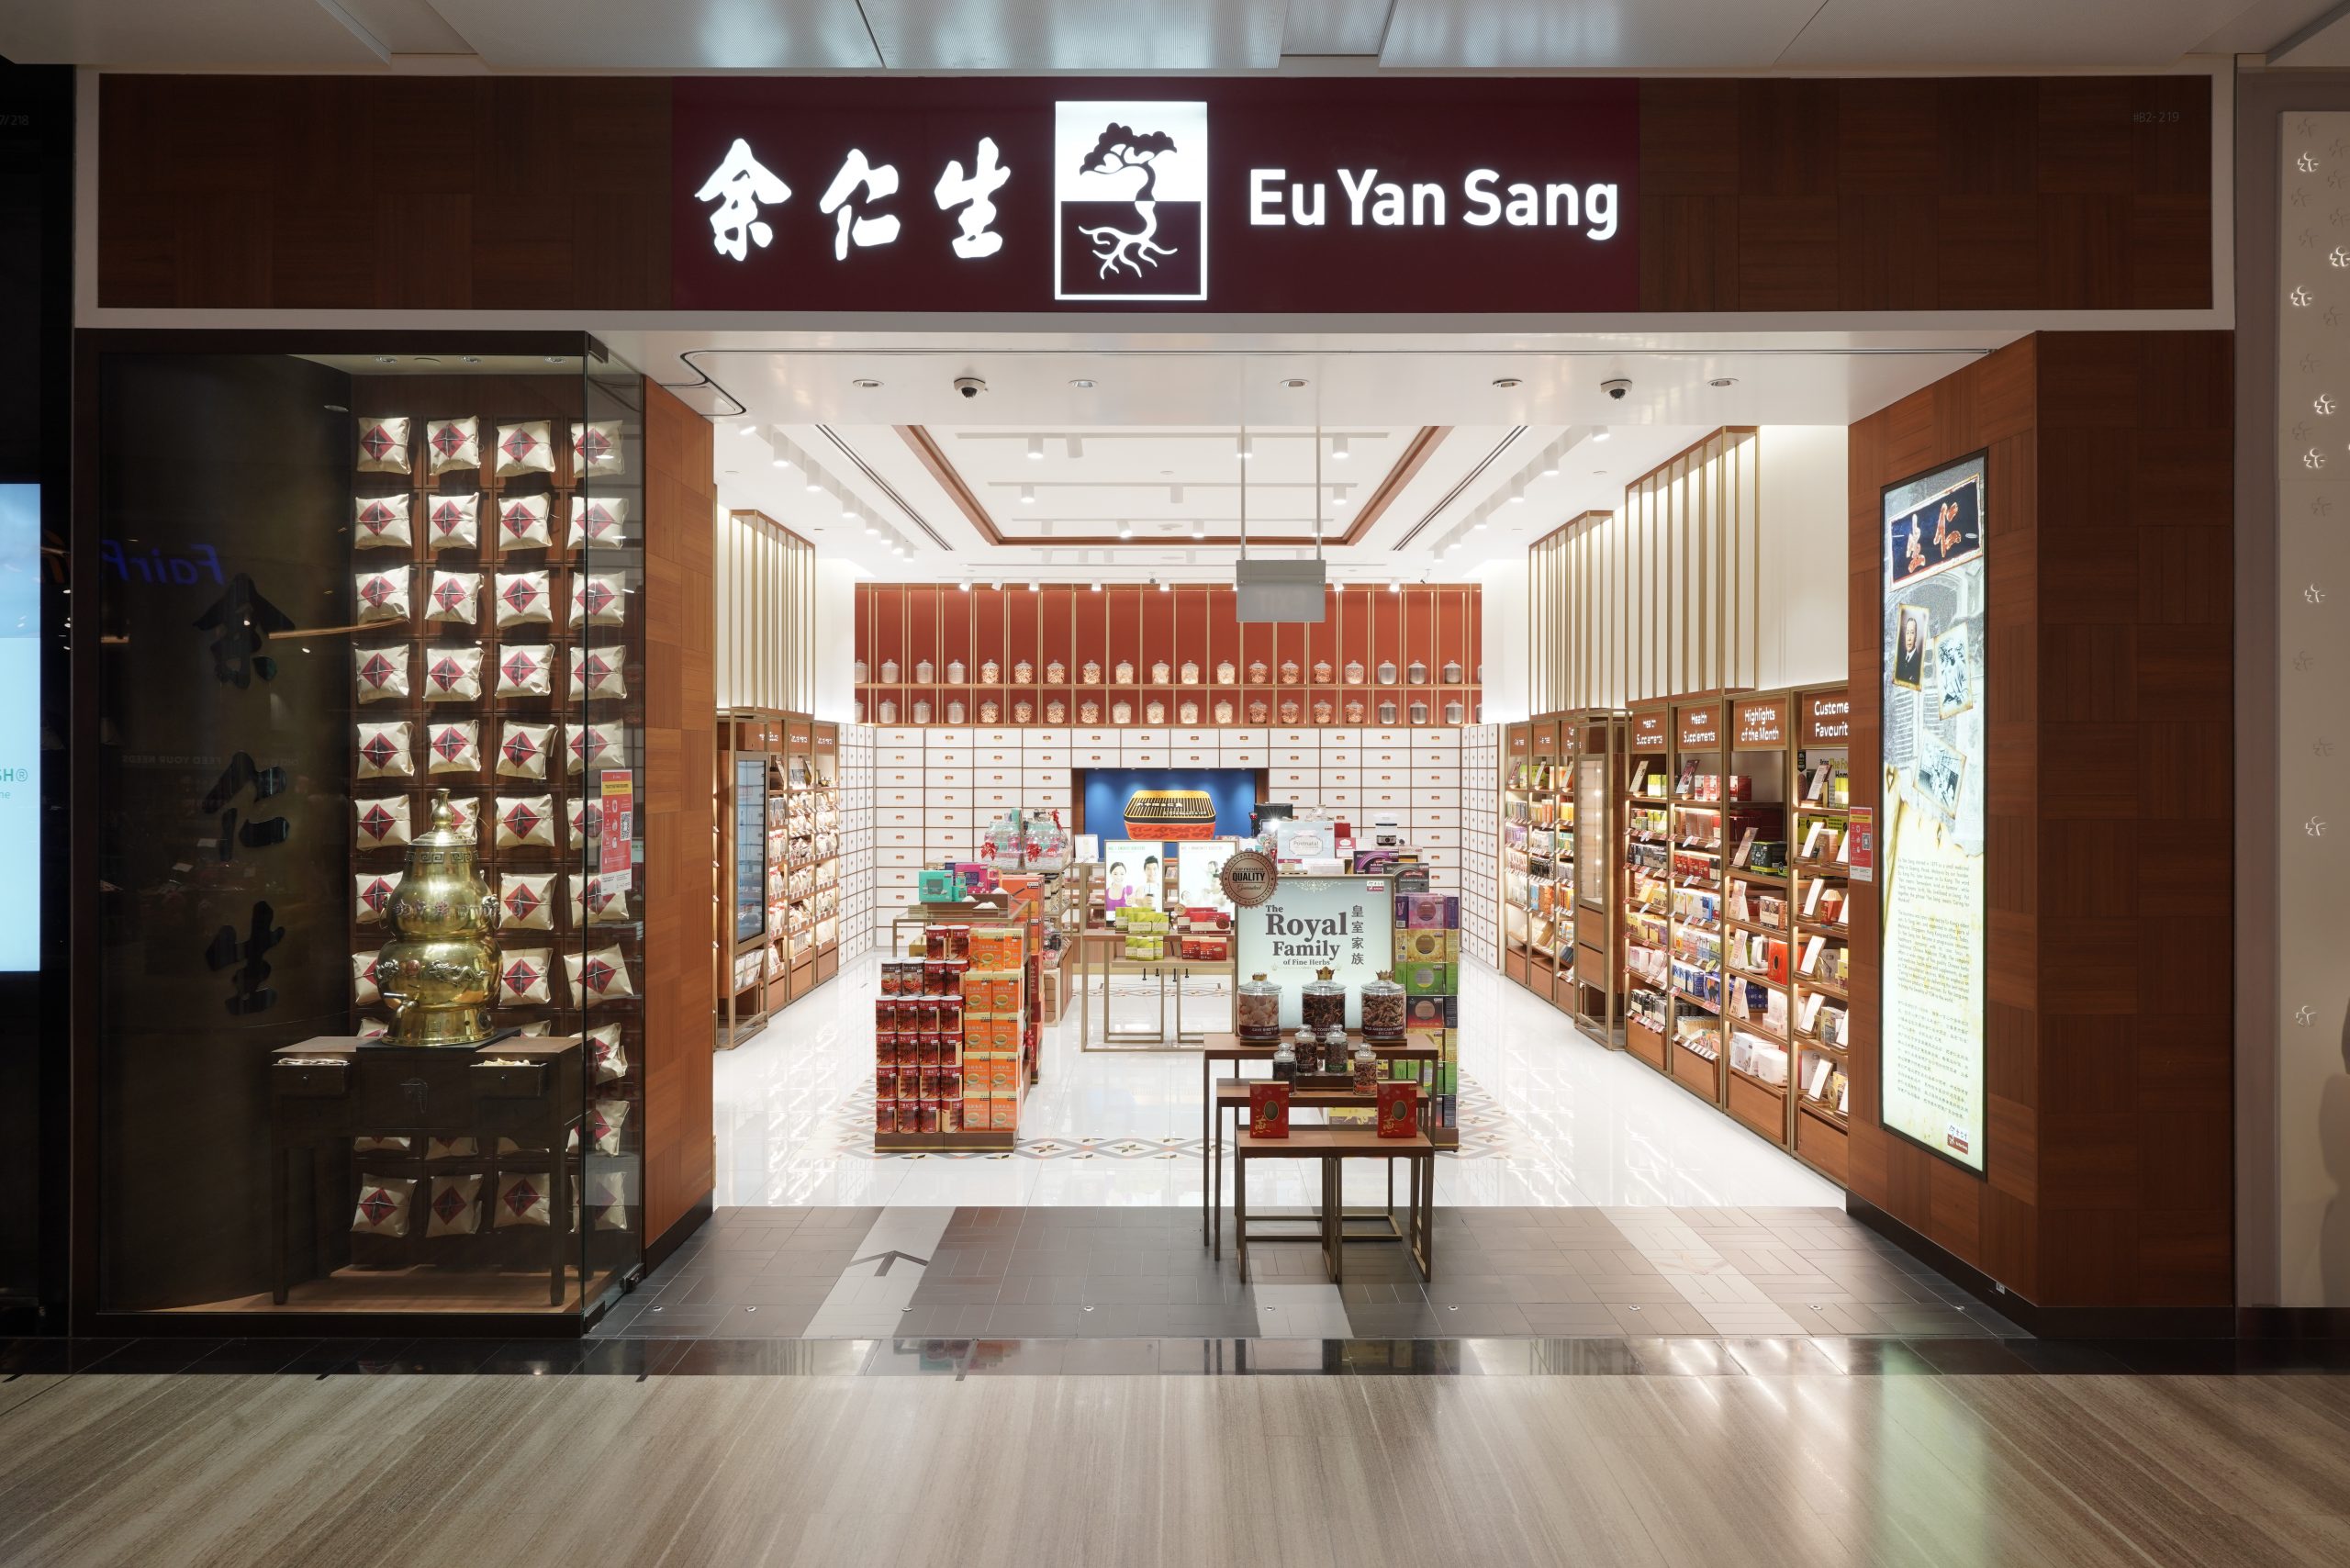 Eu Yan Sang Singapore: Leveraging the Strong Heritage to Propel into the  Future - BrandzAsia